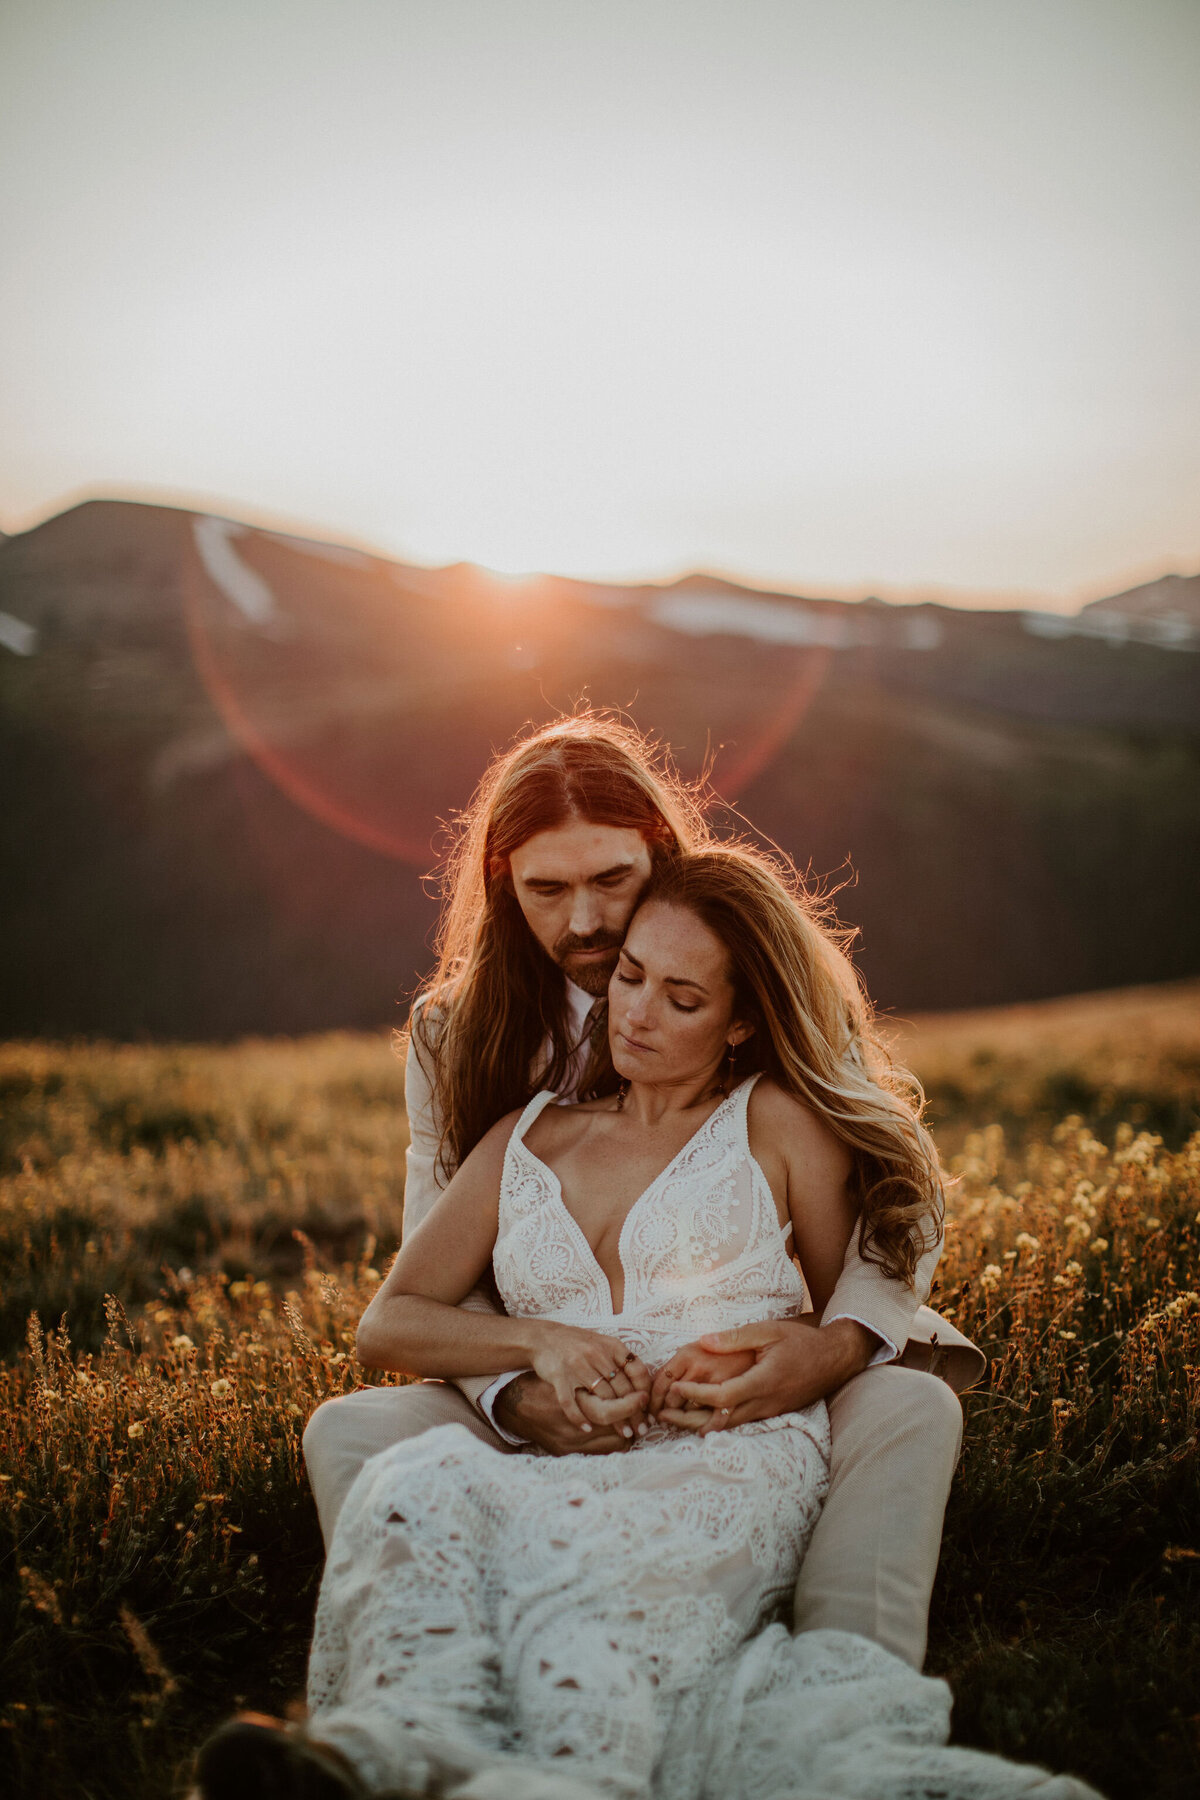 Bride and groom wearing an ivory suit and white wedding gown sit in a field holding hands during golden hour.